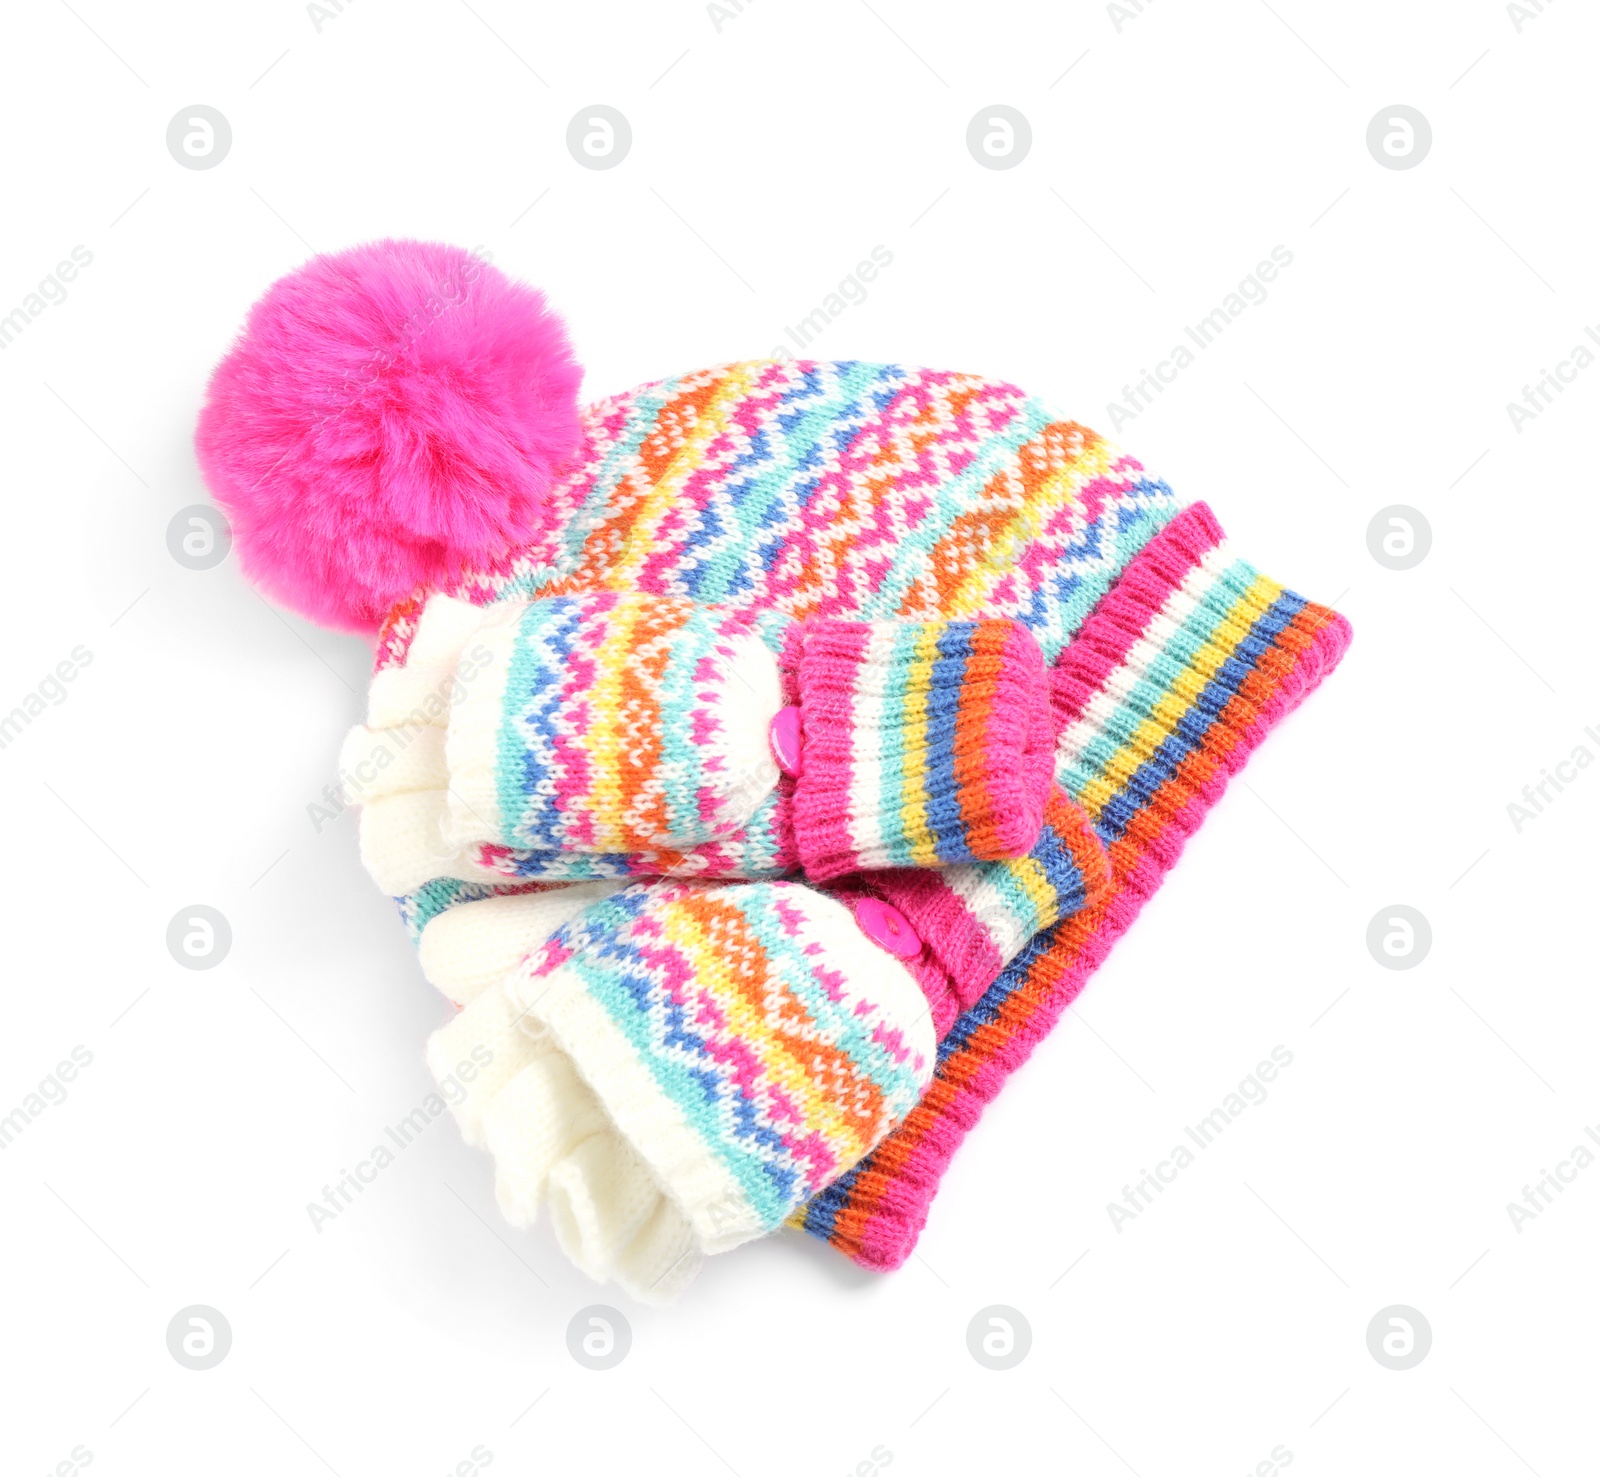 Photo of Warm knitted hat and mittens on white background, top view